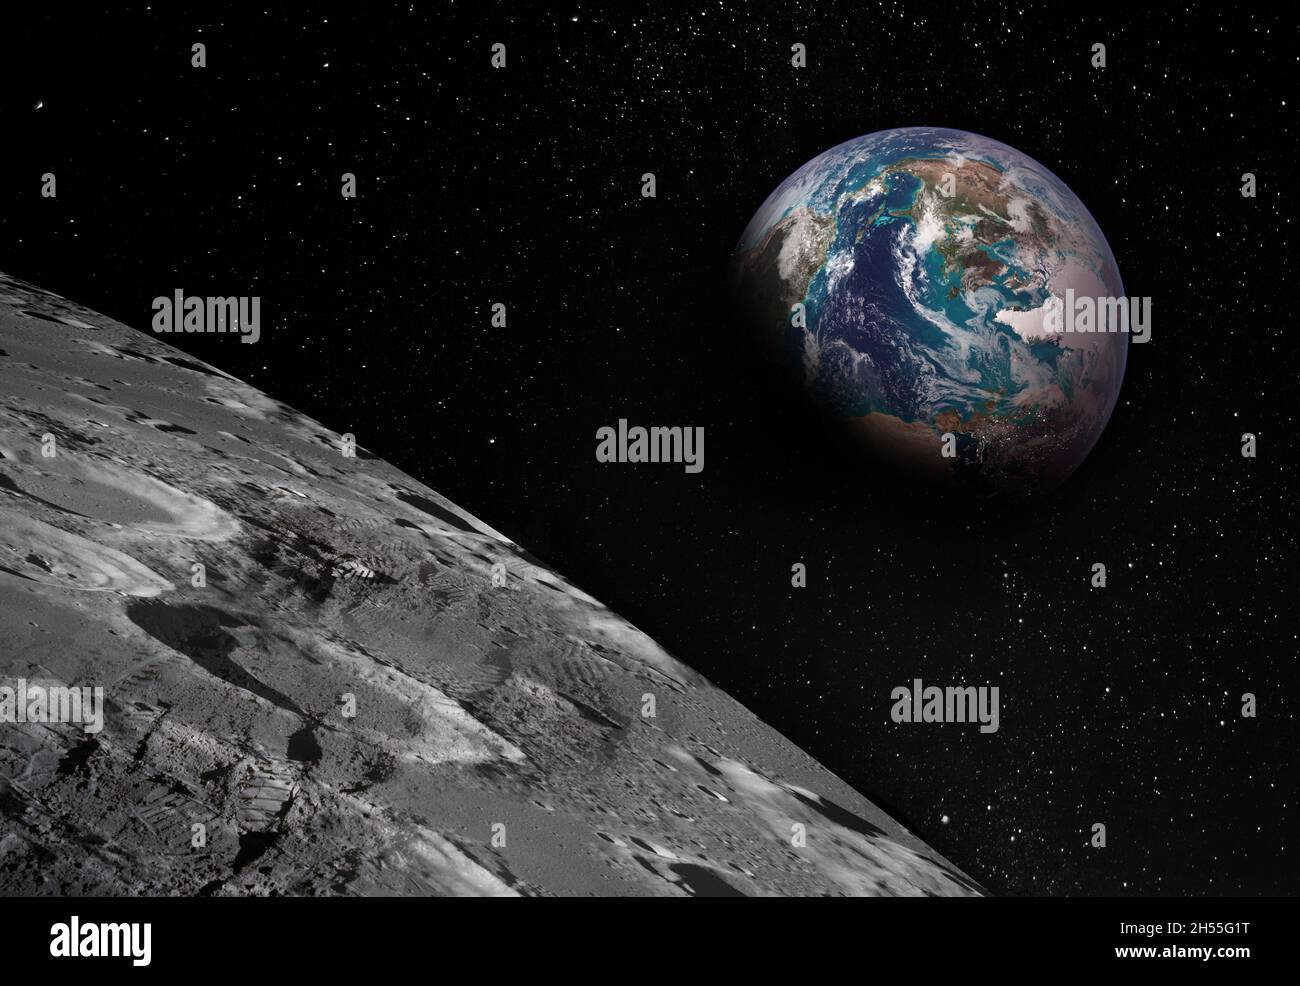 View of Moon limb with Earth rising on the horizon. Footprints as an evidence of people being there or great forgery. Collage. Elements of this image Stock Photo